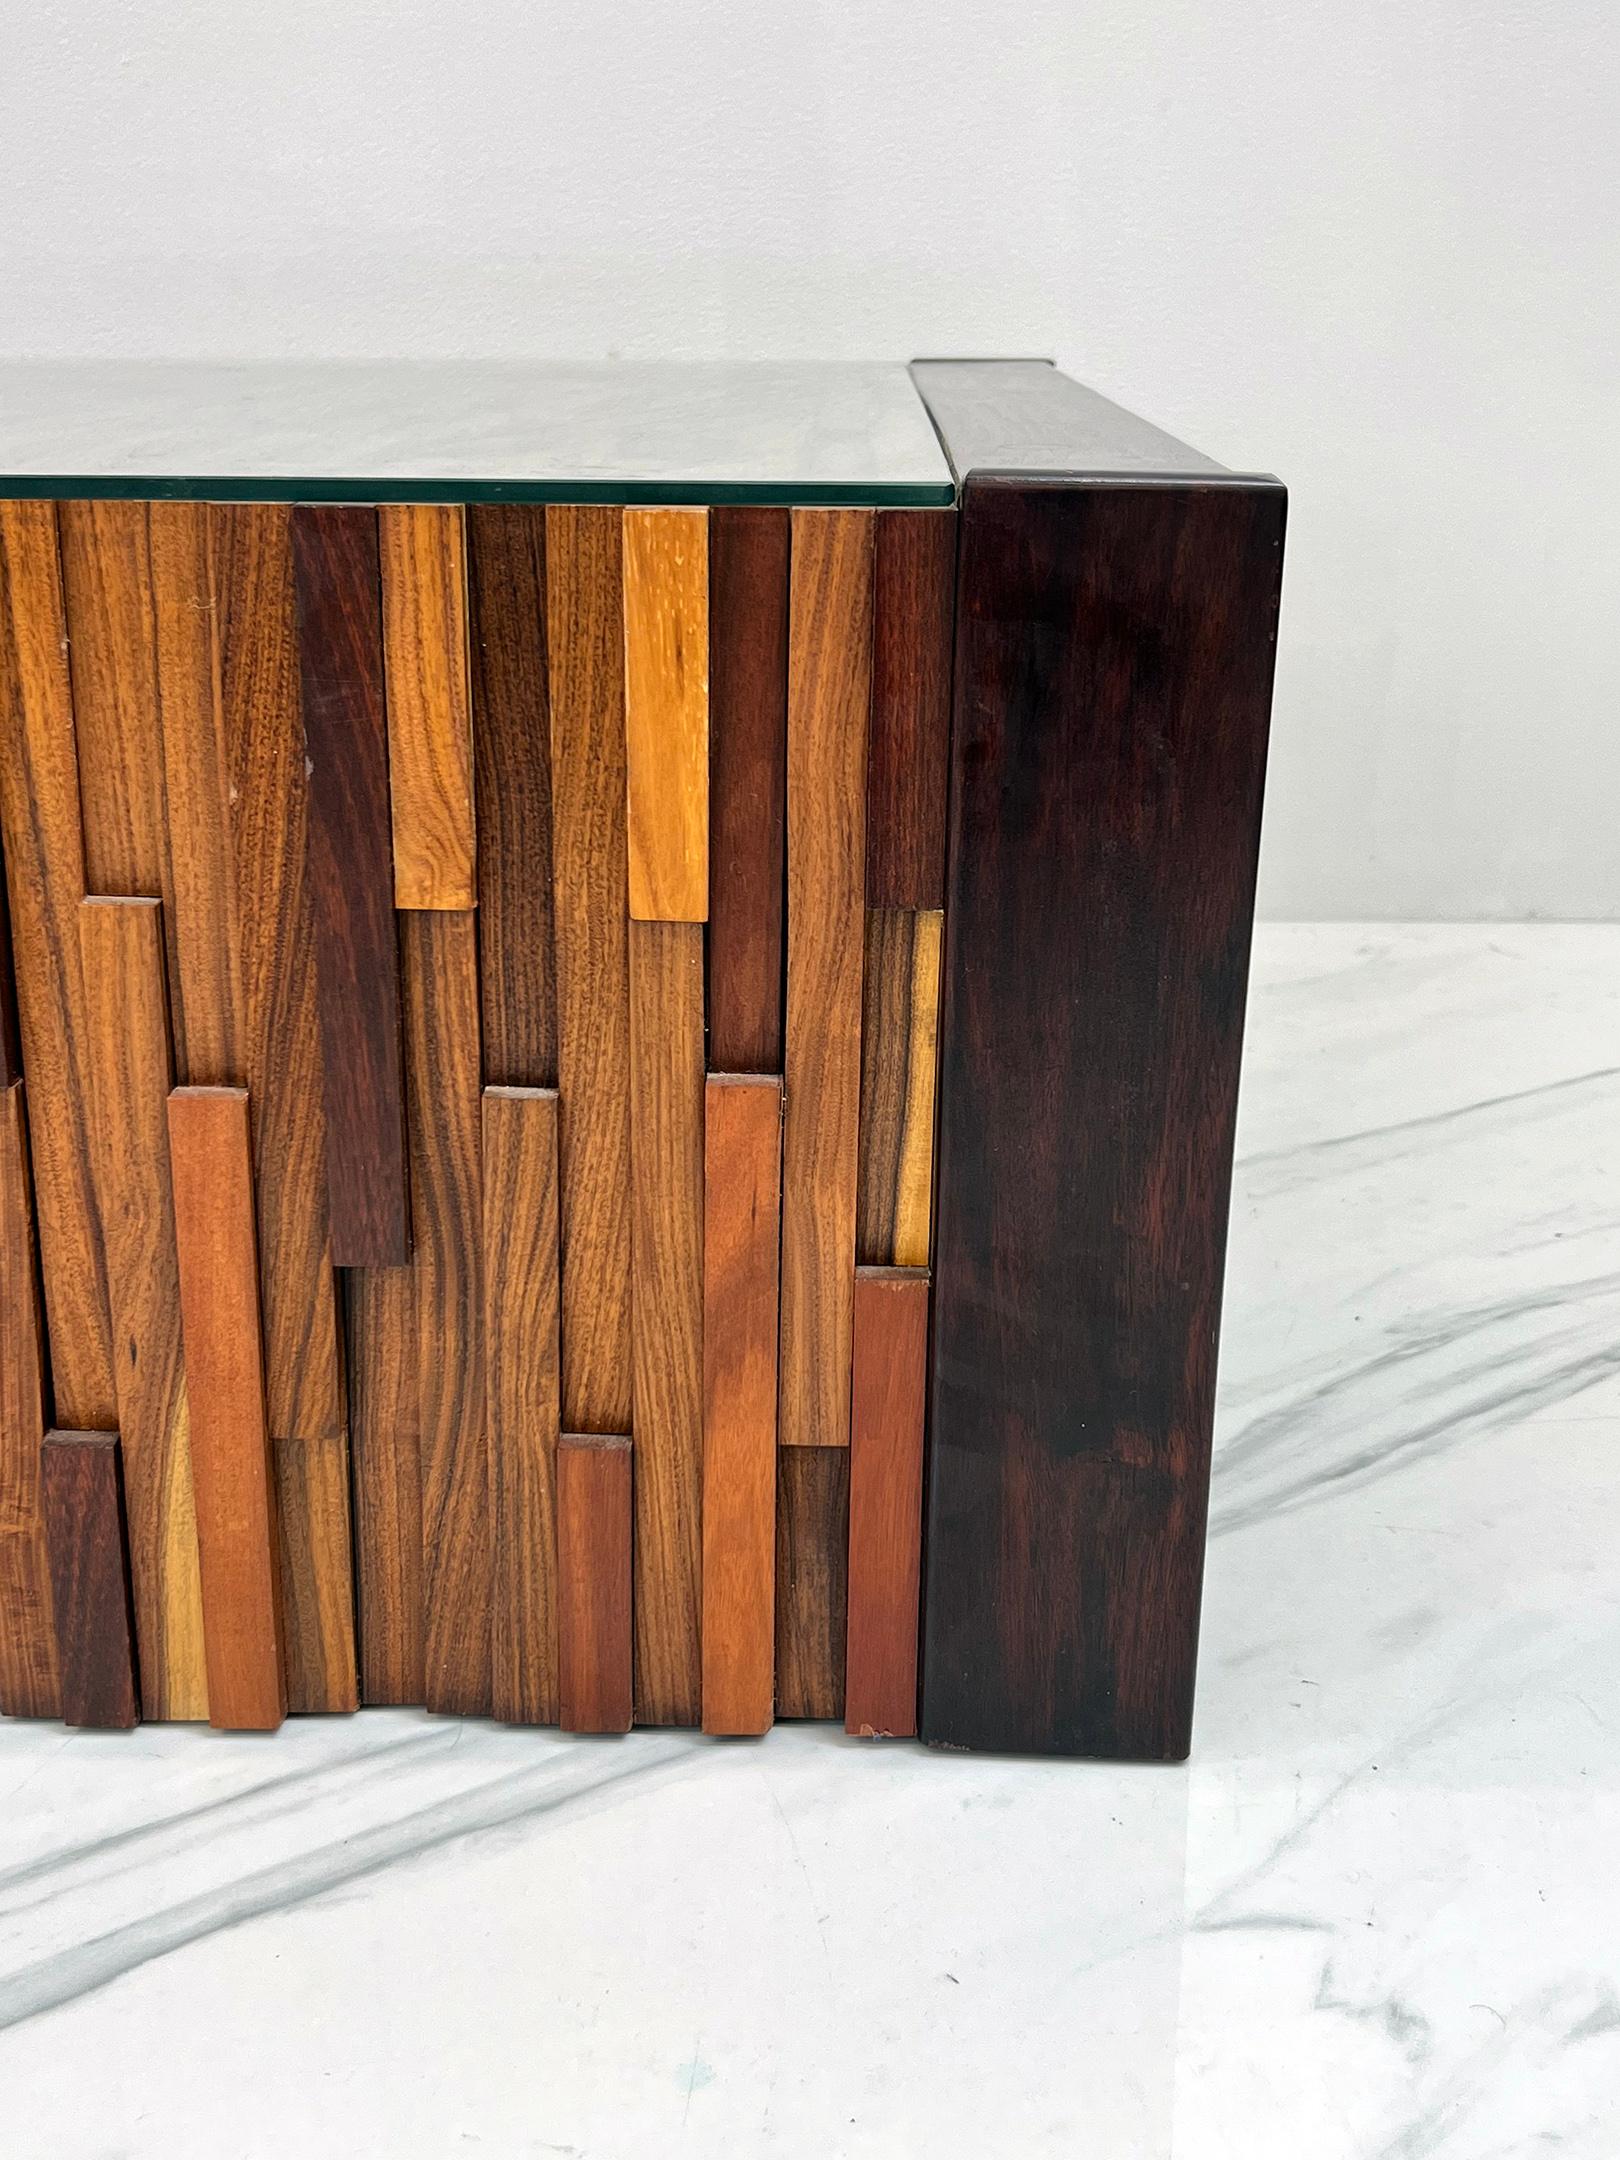 Percival Lafer Folding Rosewood Cocktail Tables, a Pair, 1970s For Sale 1